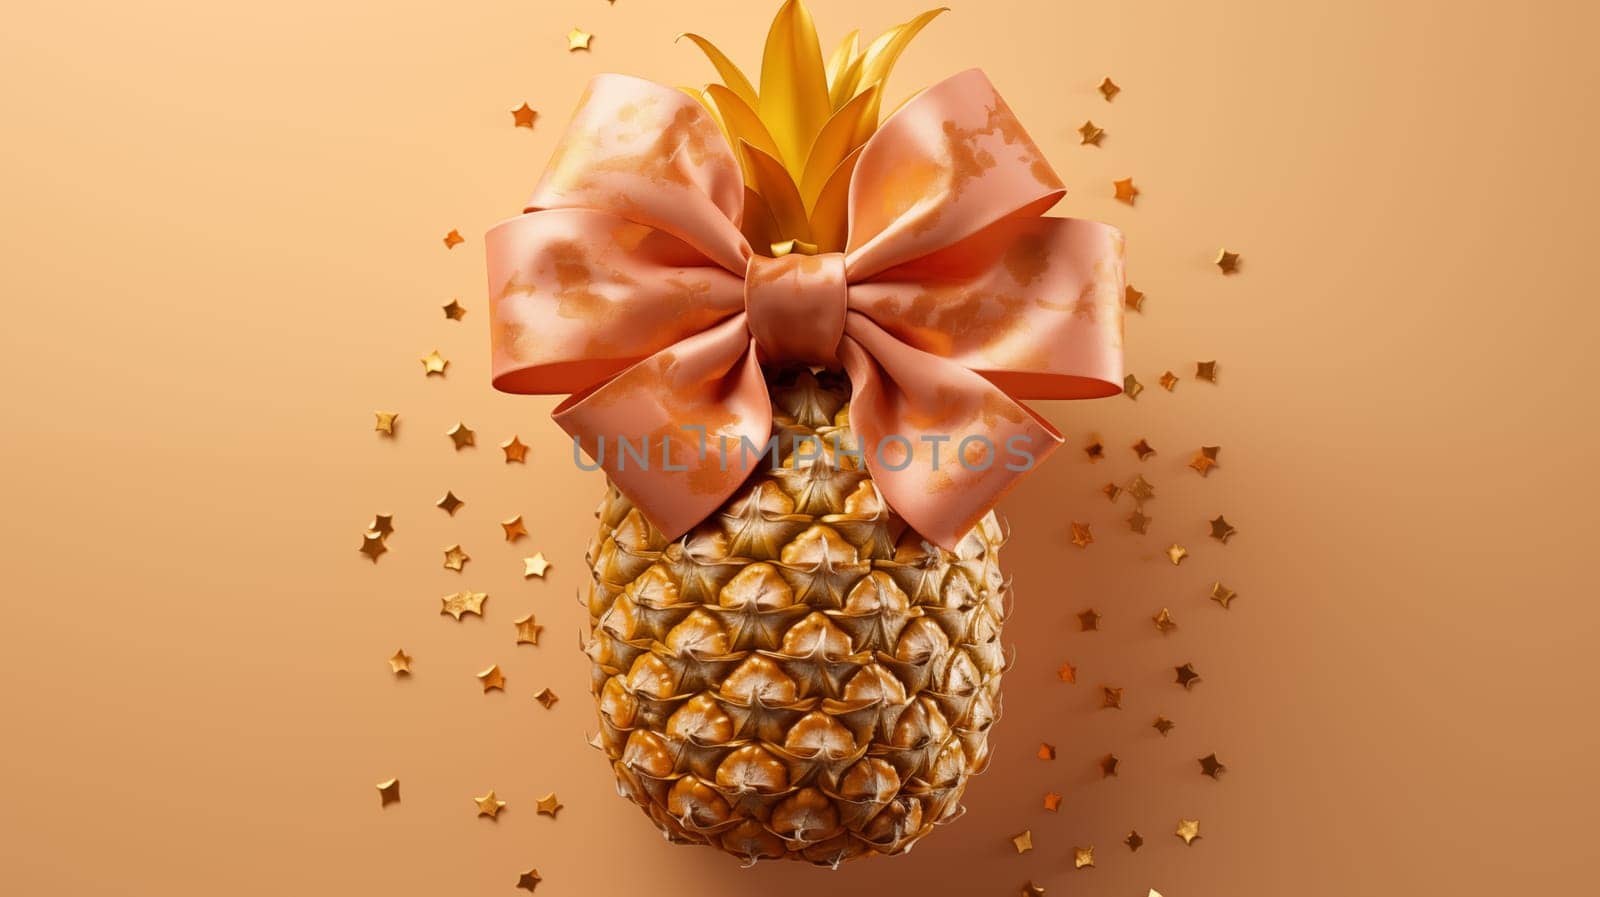 A golden pineapple with a pink bow lies on a peach-colored background, and golden confetti is scattered nearby.